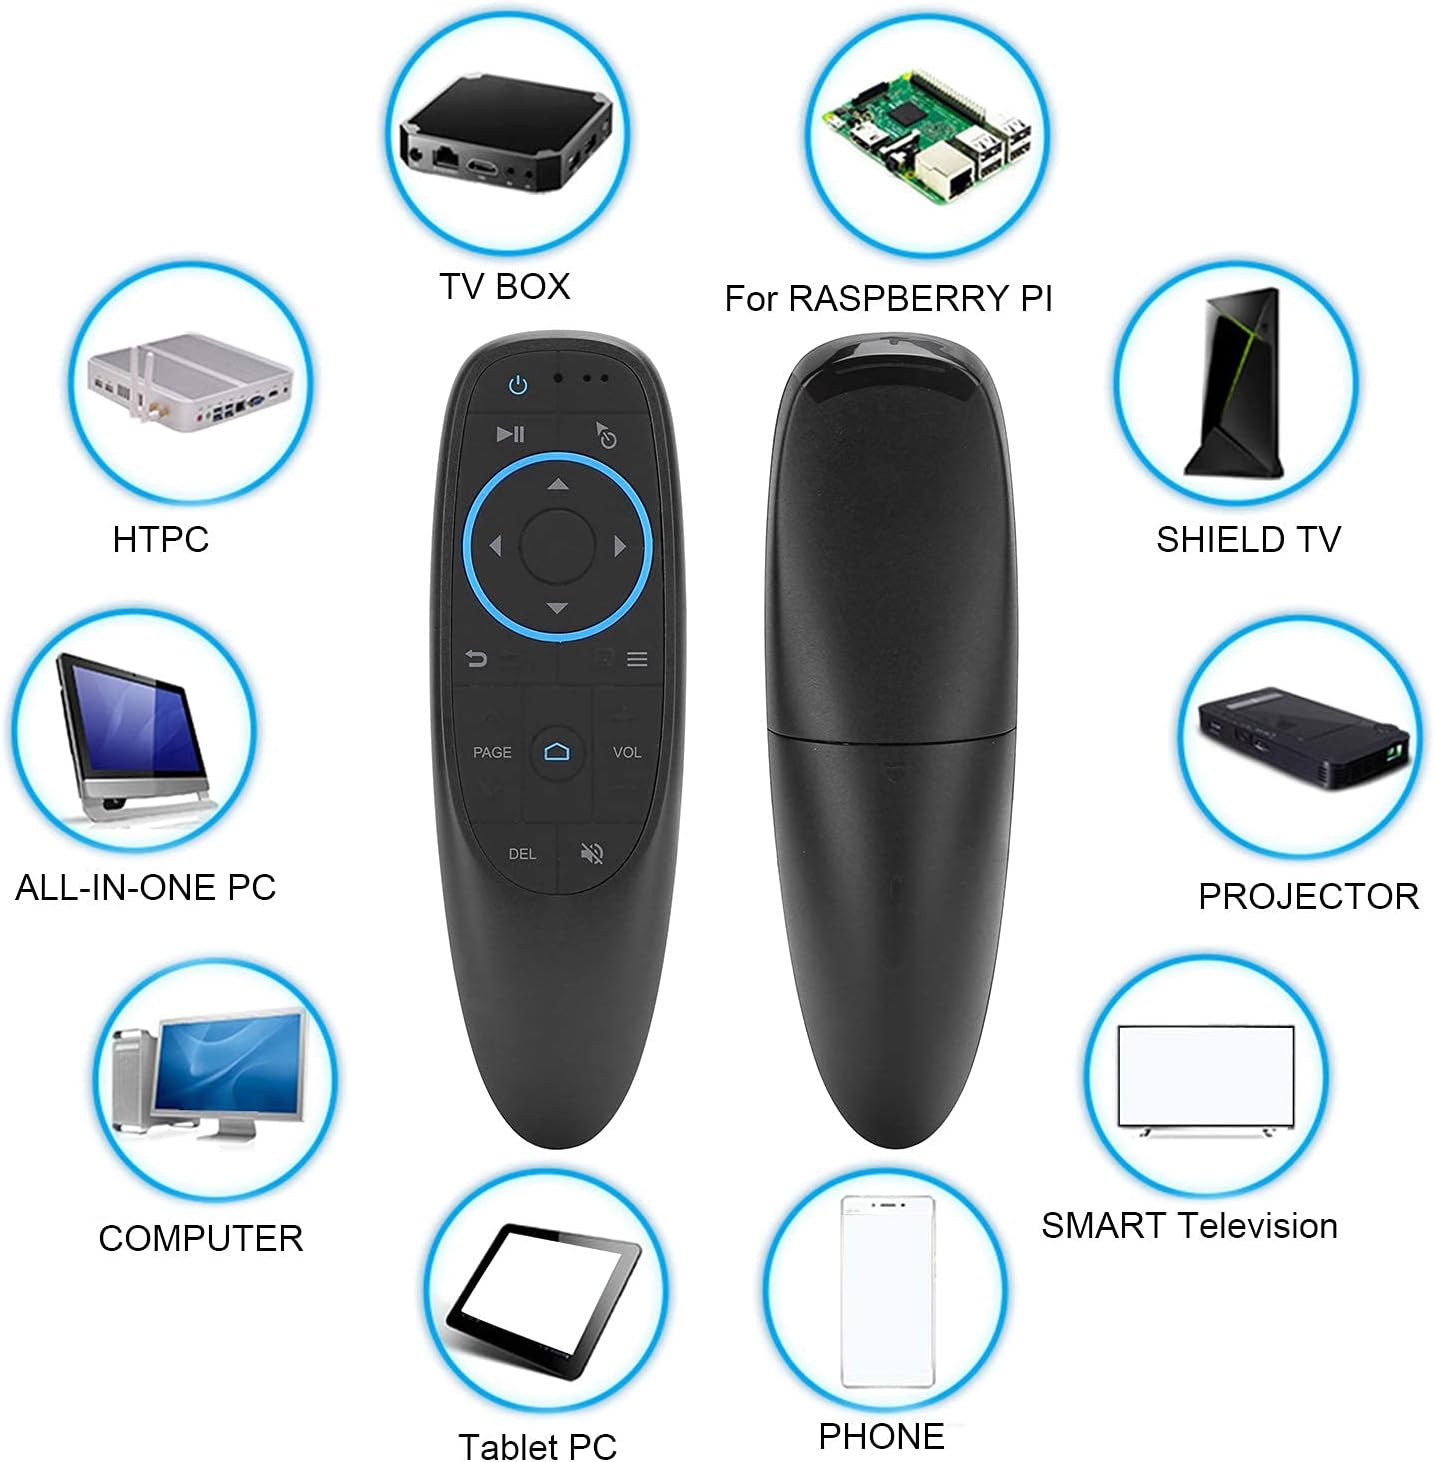 CP-AA-AIR wirelless air mouse pointer for CP-AA VIDEO